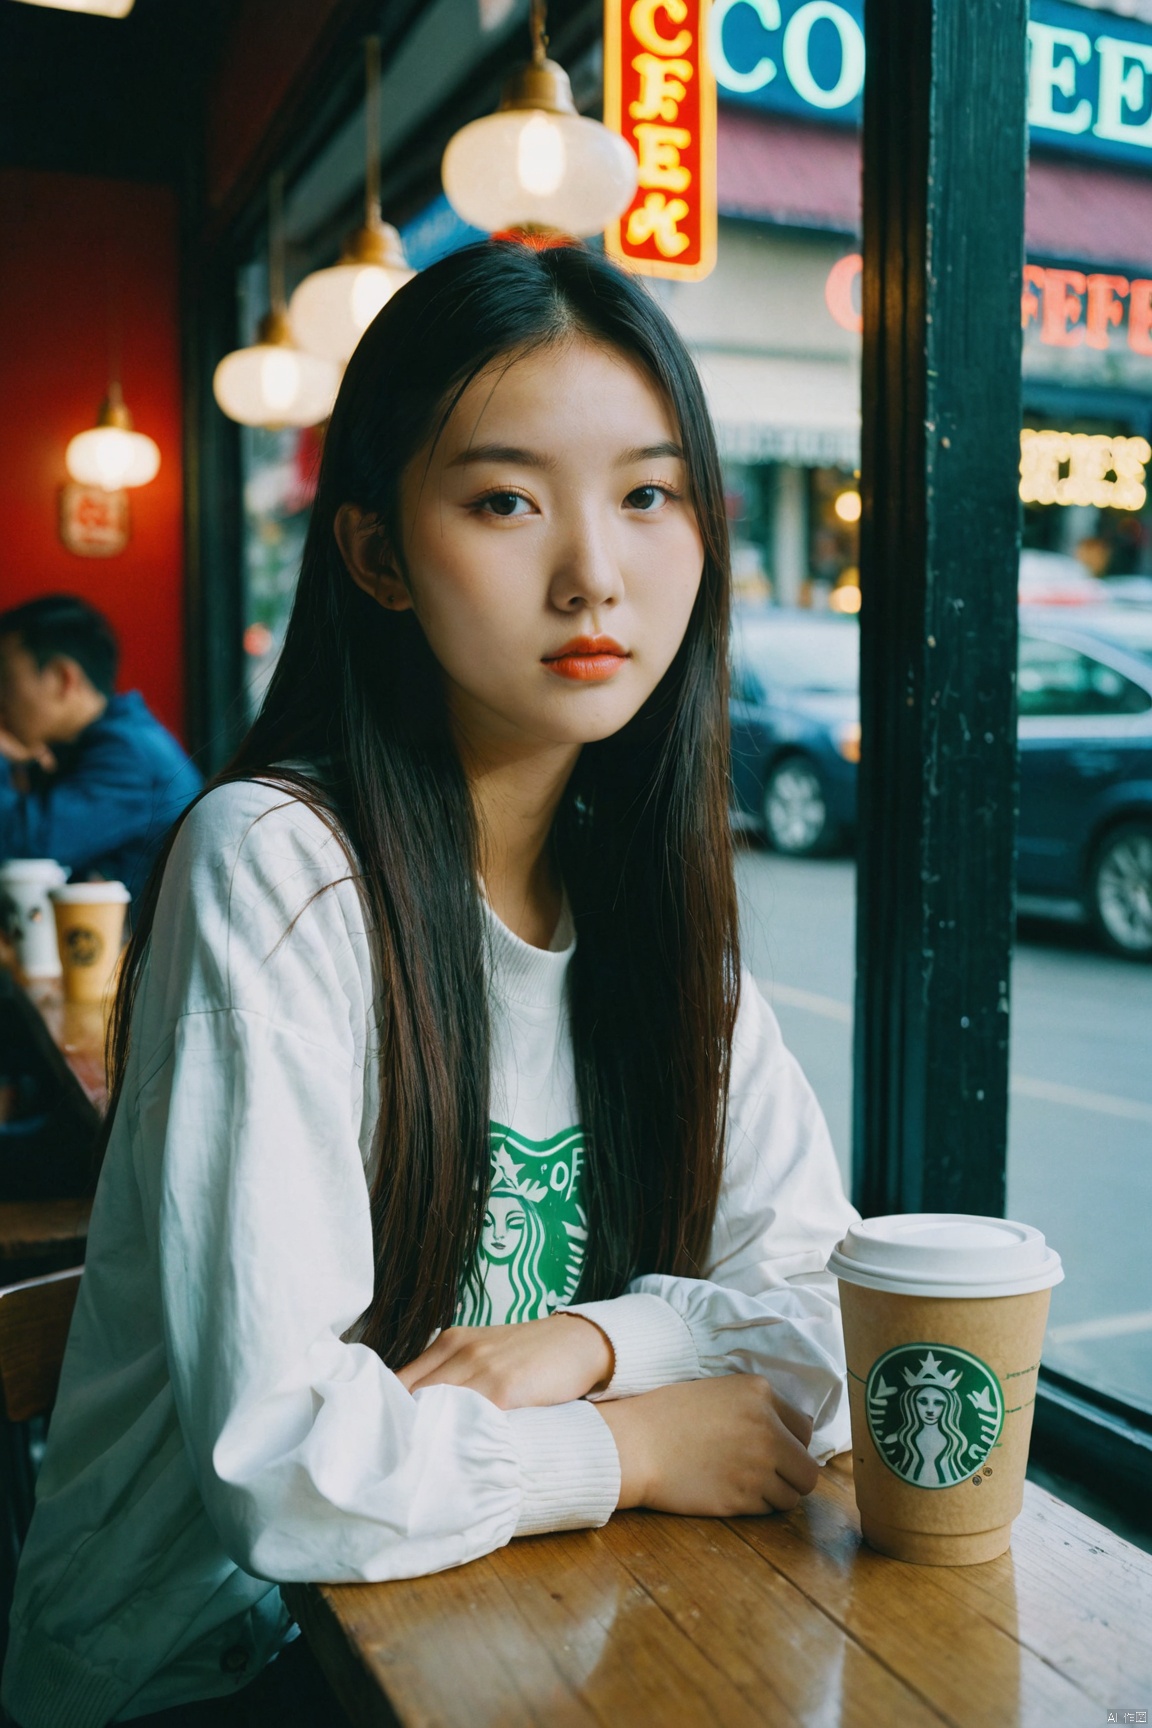  photography shot trough an outdoor window of a coffee shop with neon sign lighting, window glares and reflections, depth of field, young chinese girl sitting at a table, portrait, kodak portra 800, 105 mm f1. 8